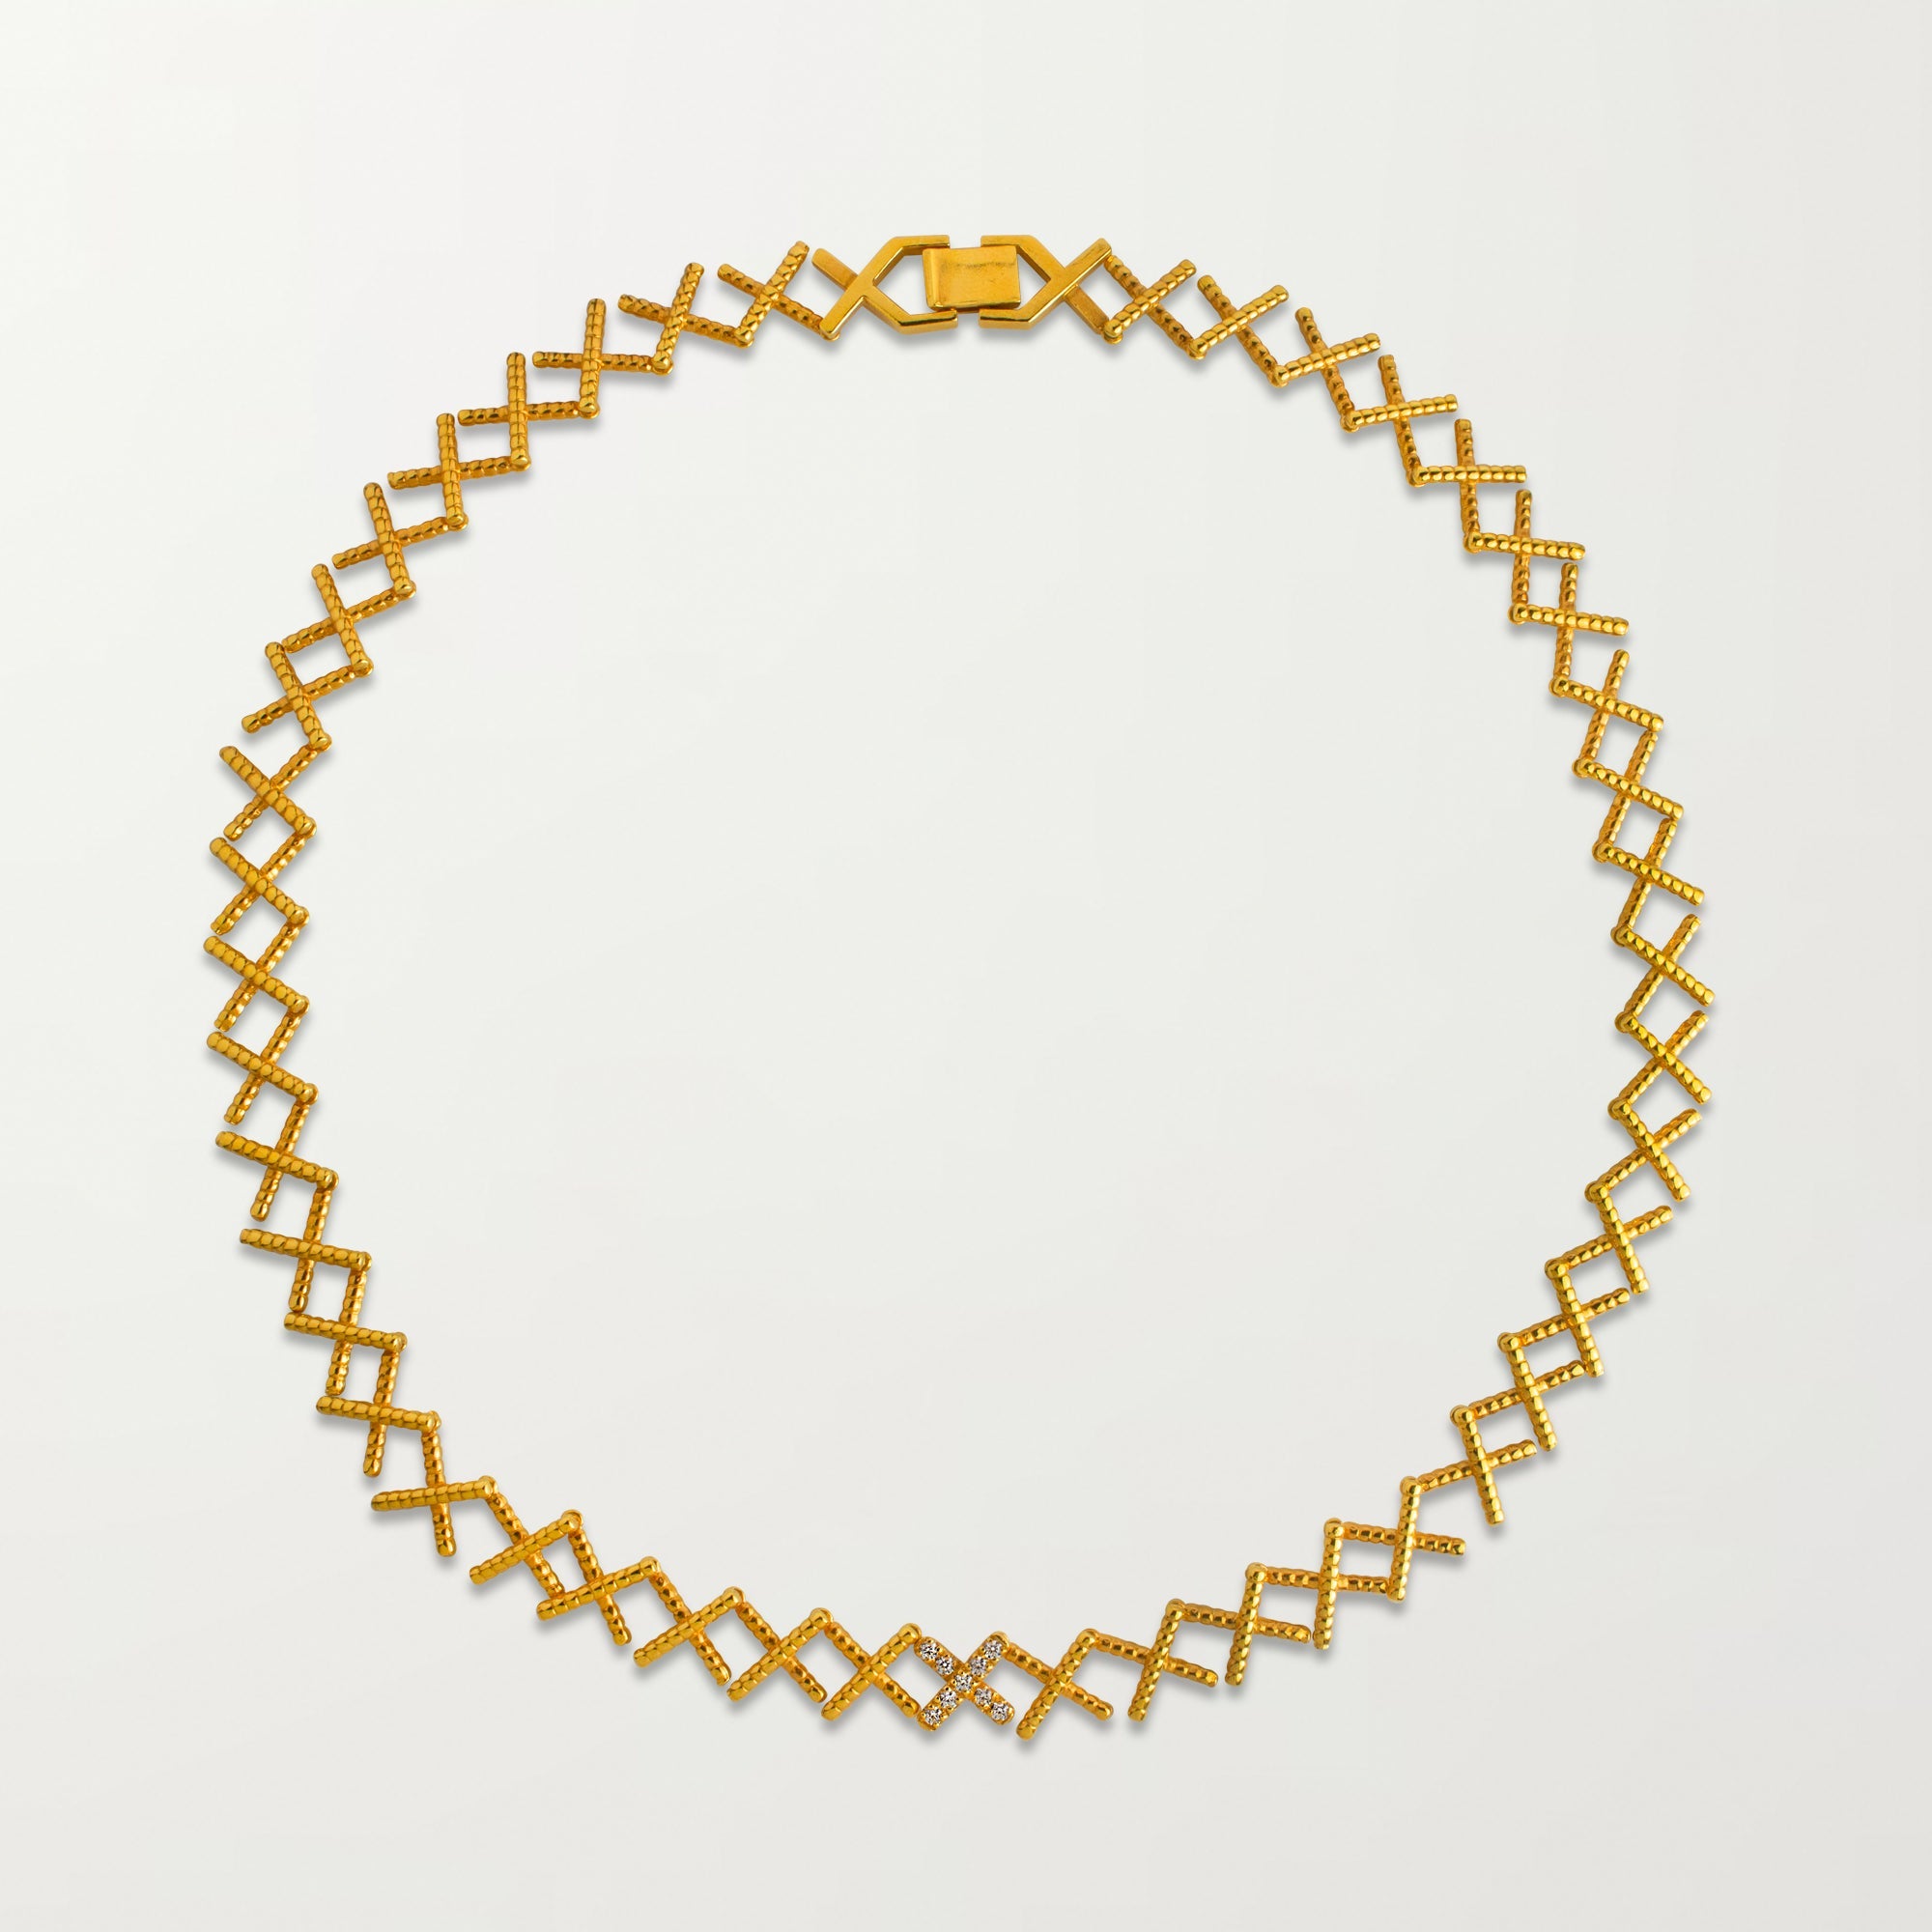 Picture of The Cruzado Necklace